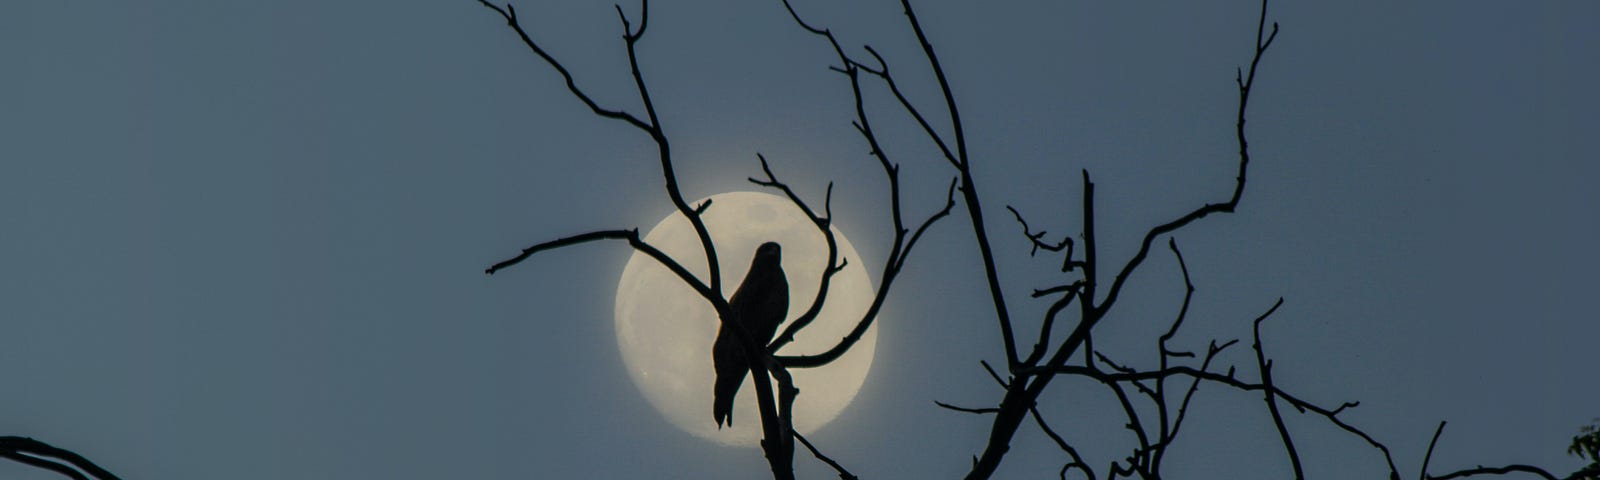 bird and tree branches silhouetted by the moon